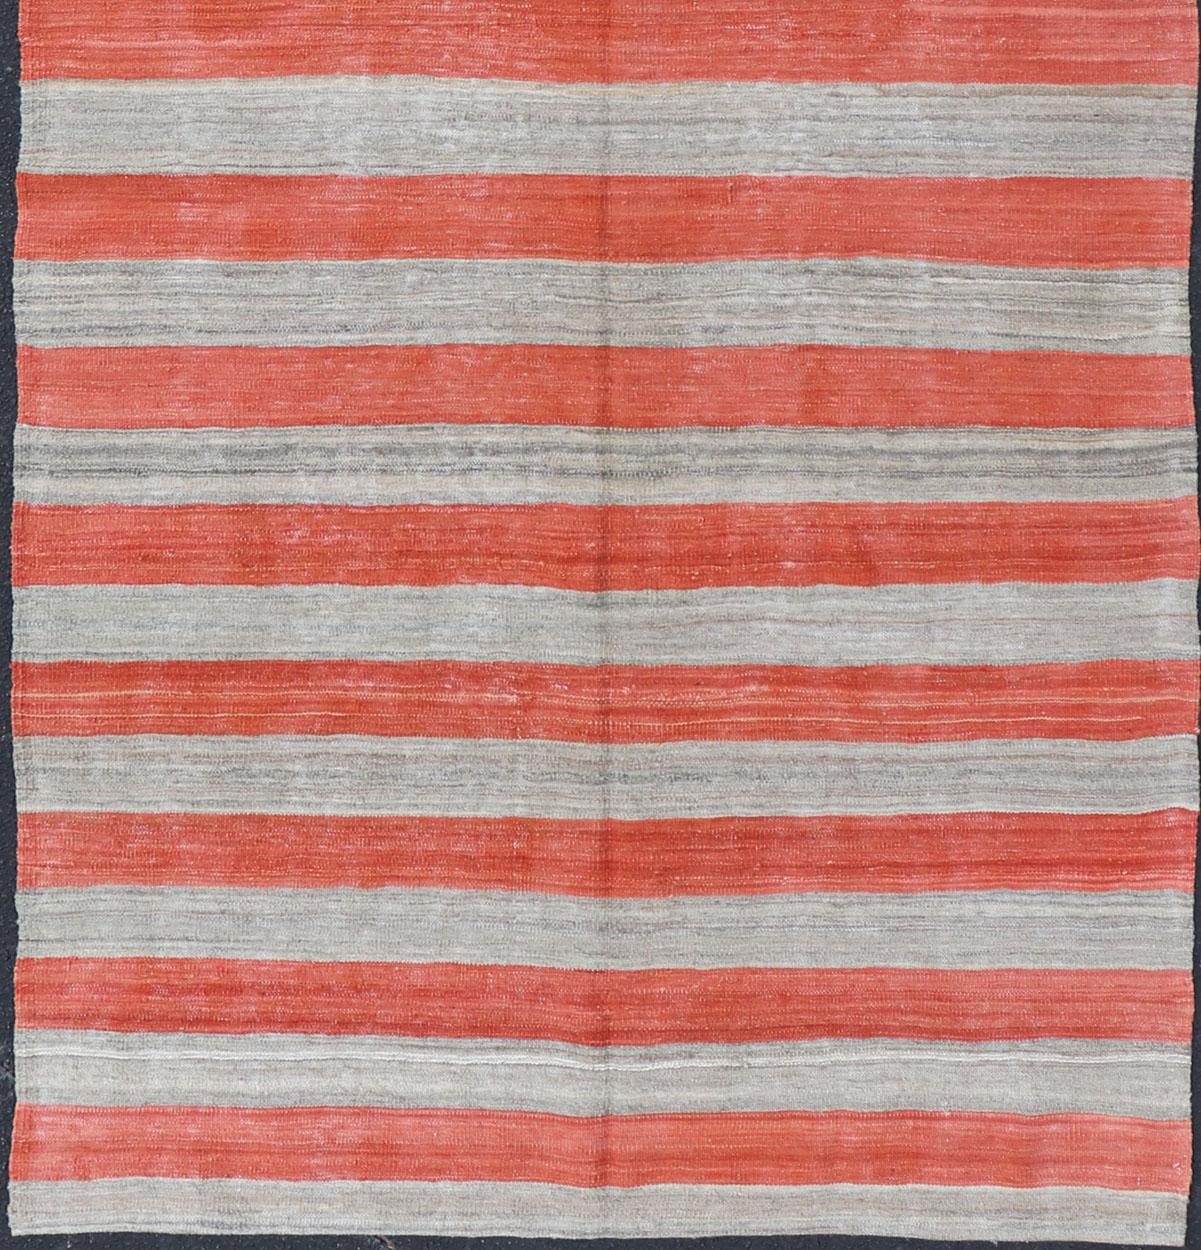 Hand-Woven Flat-Weave Modern Kilim Wide Runner with Stripes in Shades of Orange Red & Gray For Sale